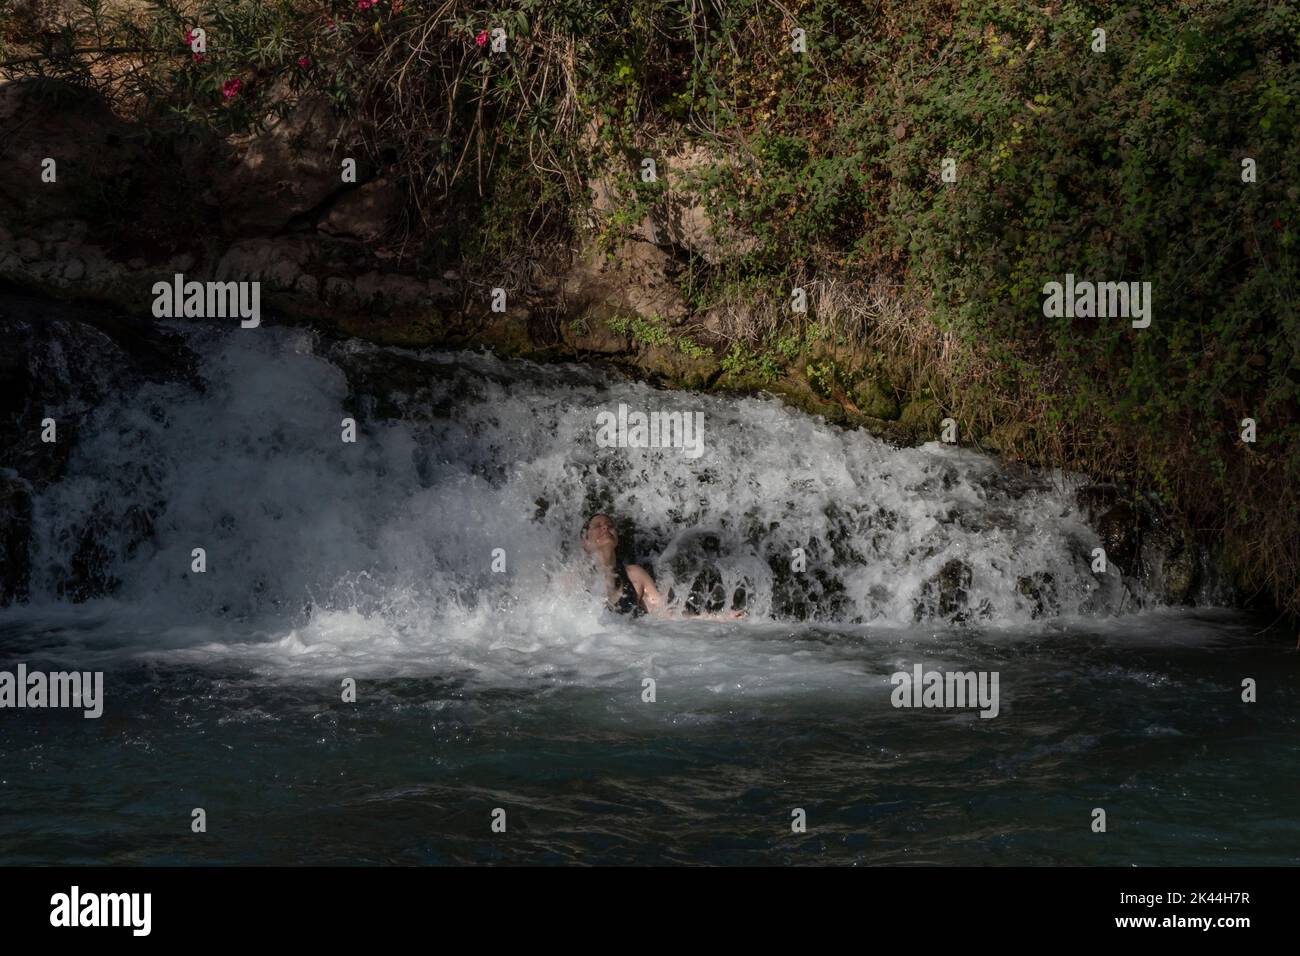 An Israeli woman bathes in a natural spring water pool of Amal stream which crosses Gan HaShlosha National Park also known by its Arabic name Sakhne in Israel Stock Photo